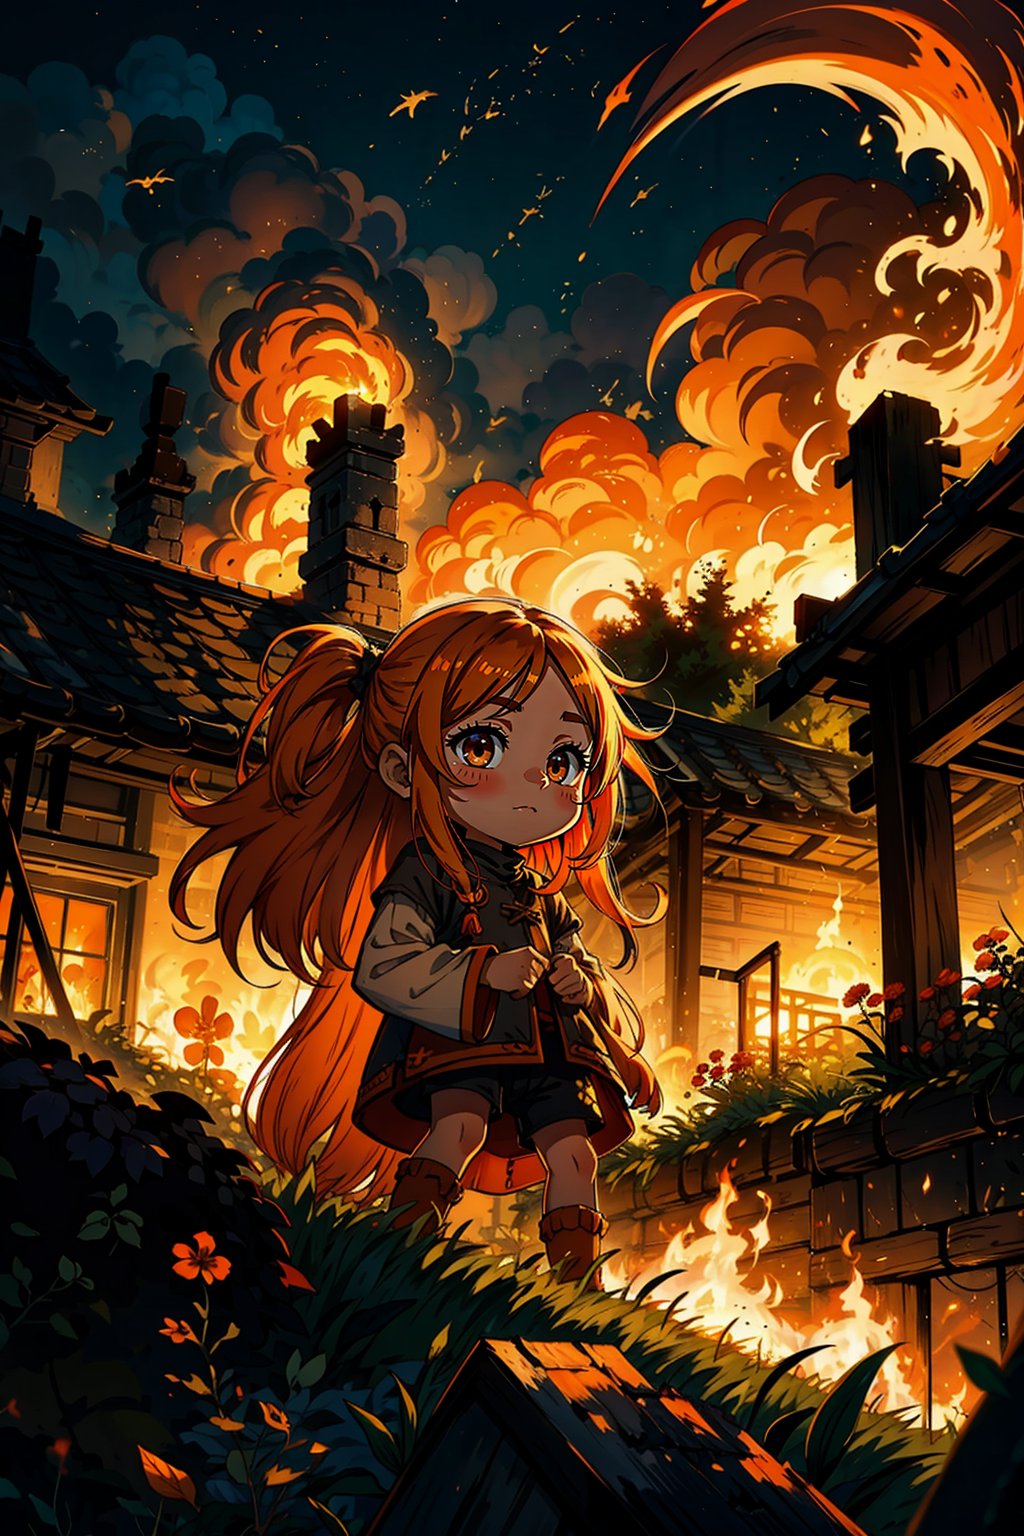 An orange long hair villager with freckles. Flames engulf the medival village in 